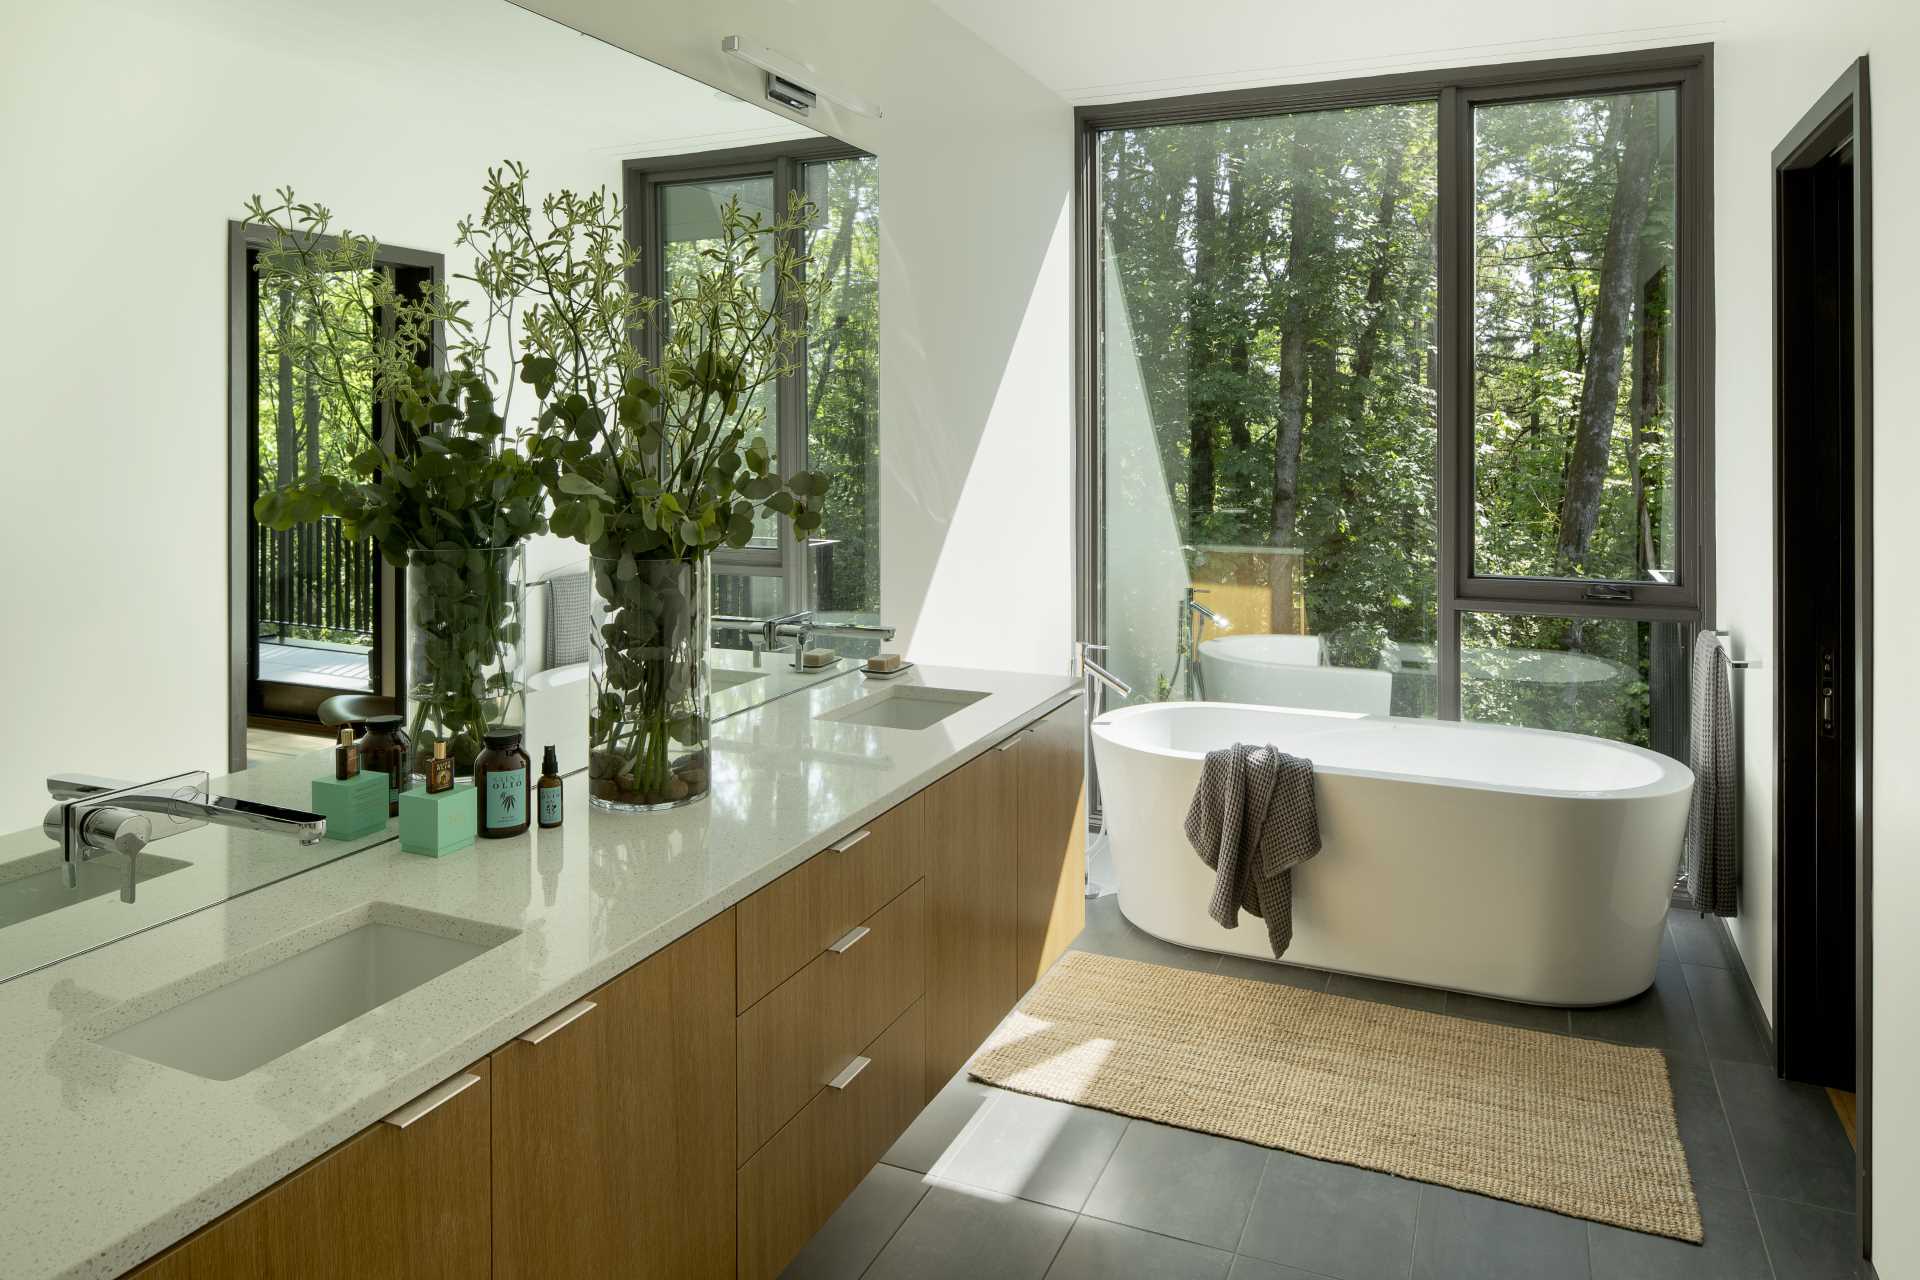 In this modern ensuite bathroom, a freestanding bathtub is positioned in front of the floor-to-ceiling window, while a double vanity is located below a large mirror.